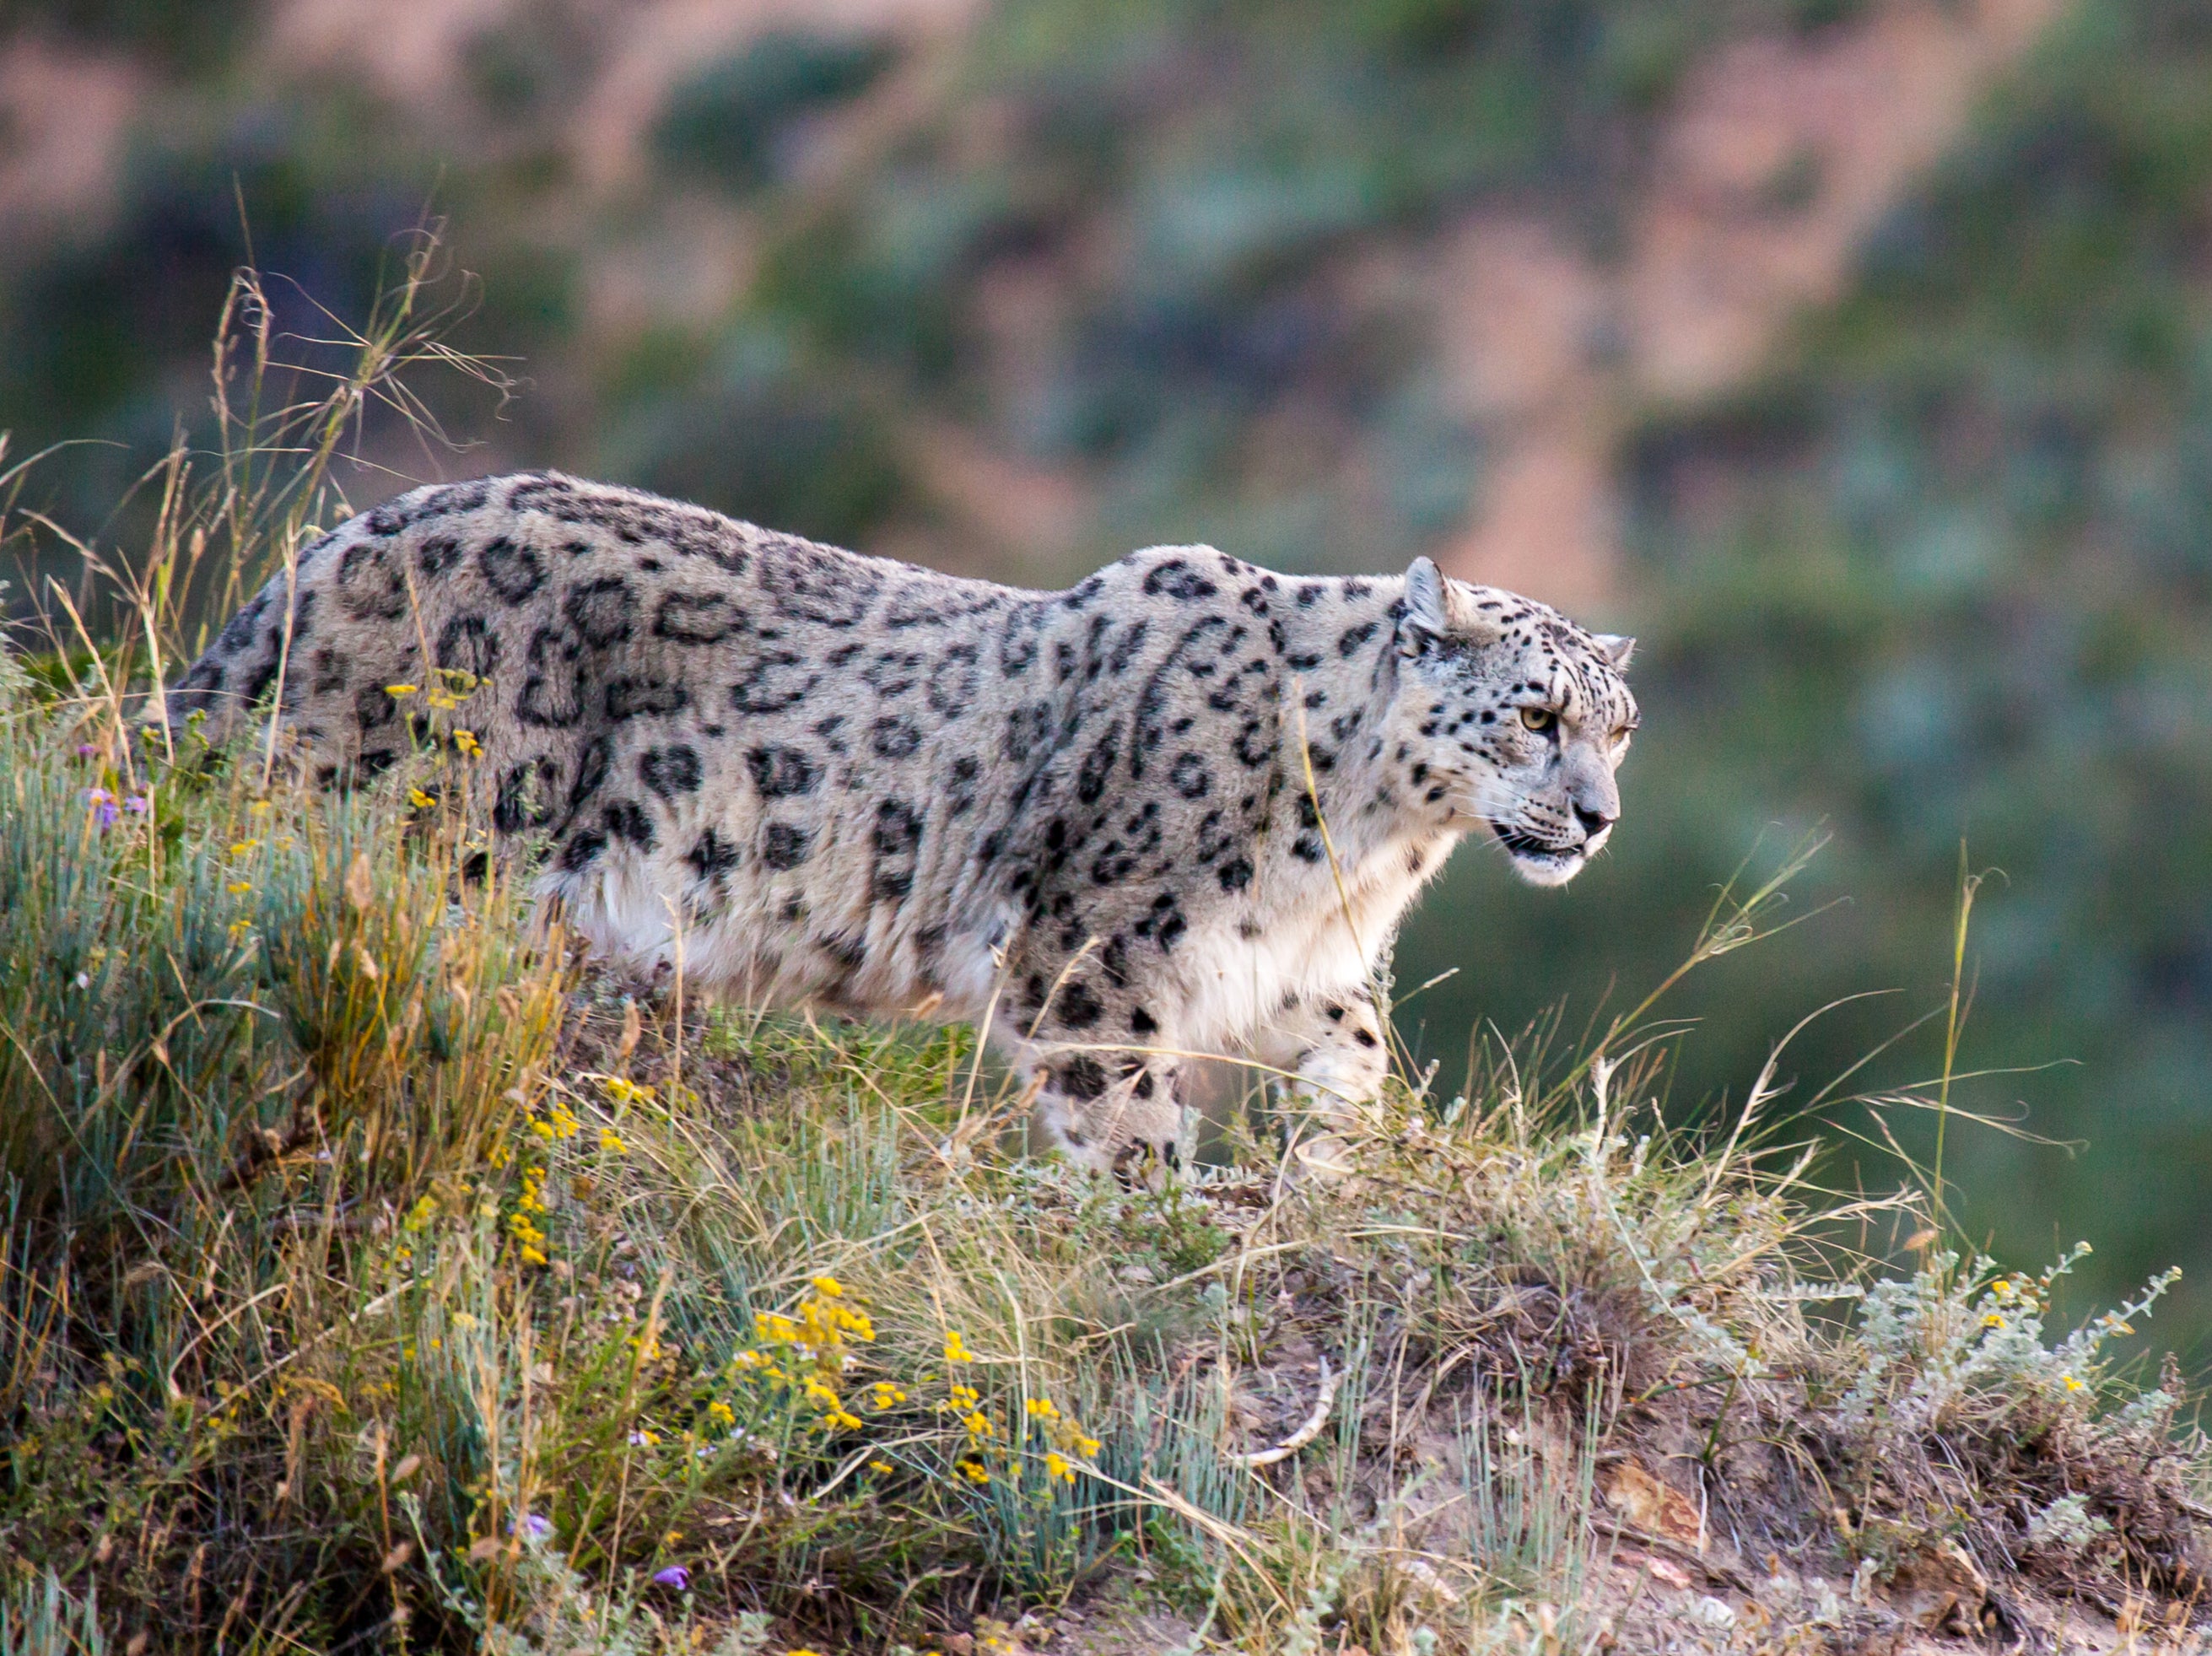 Snow leopards and citizen science: Seeking the grey ghost in